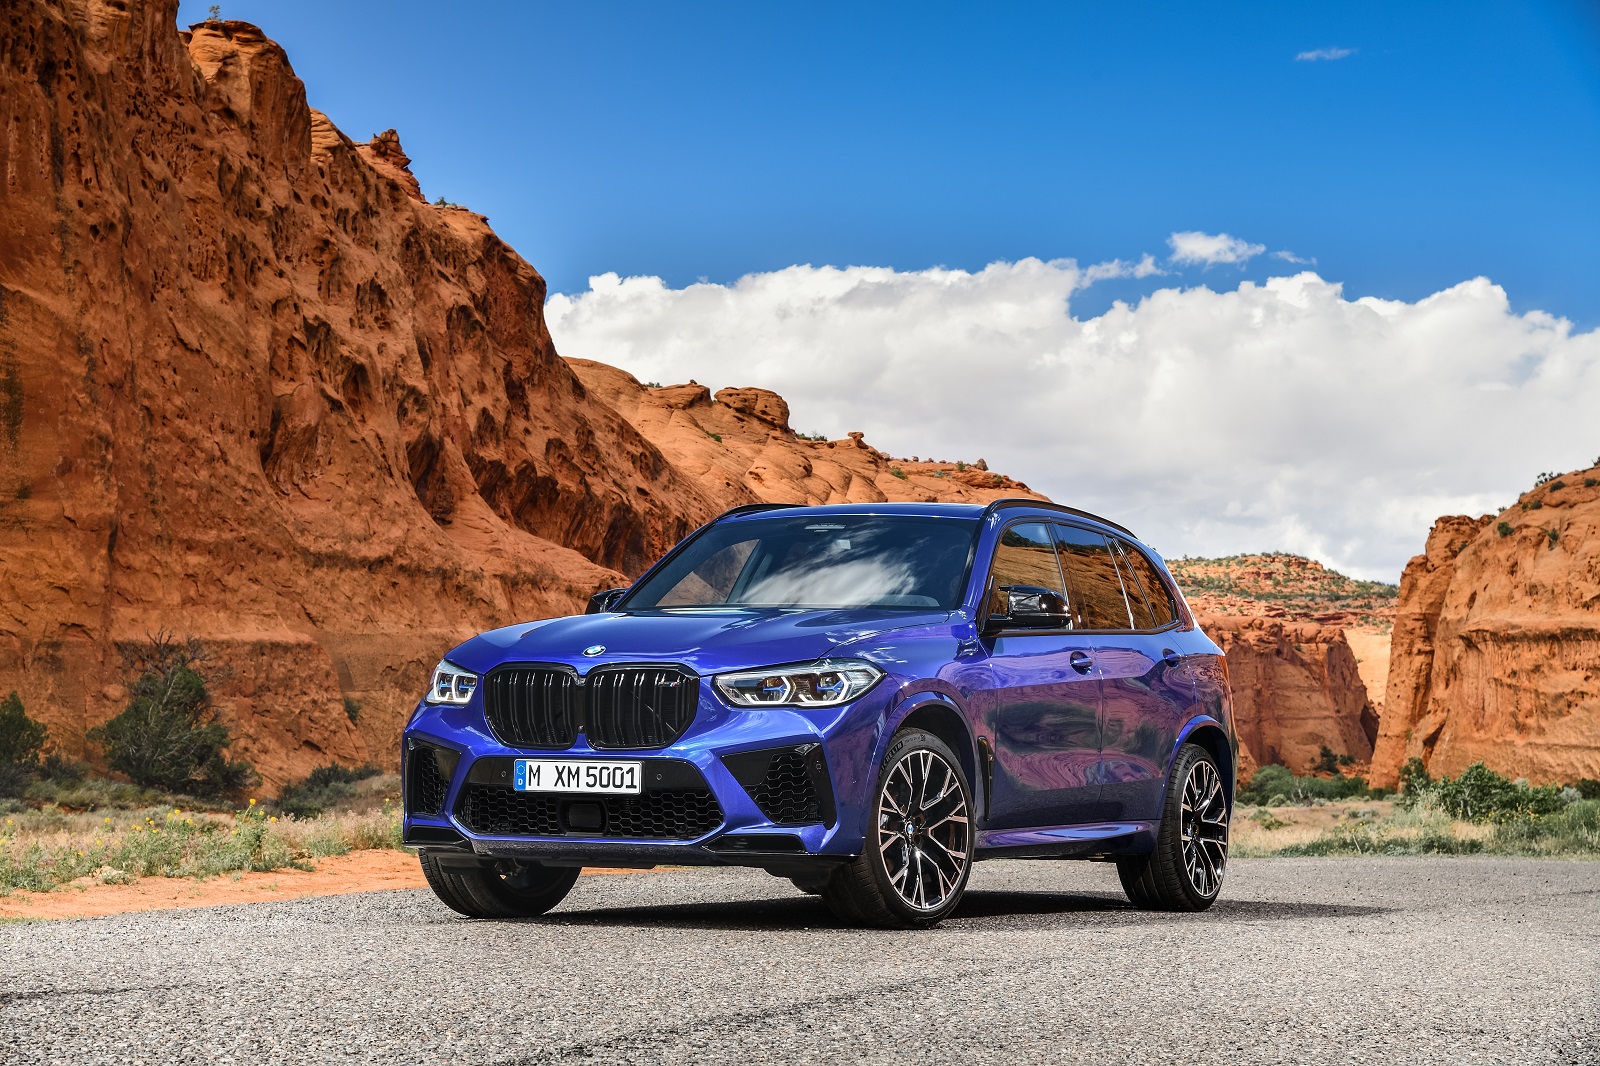 BMW X5 M Competition Launched In India At Rs. 1.95 Crore